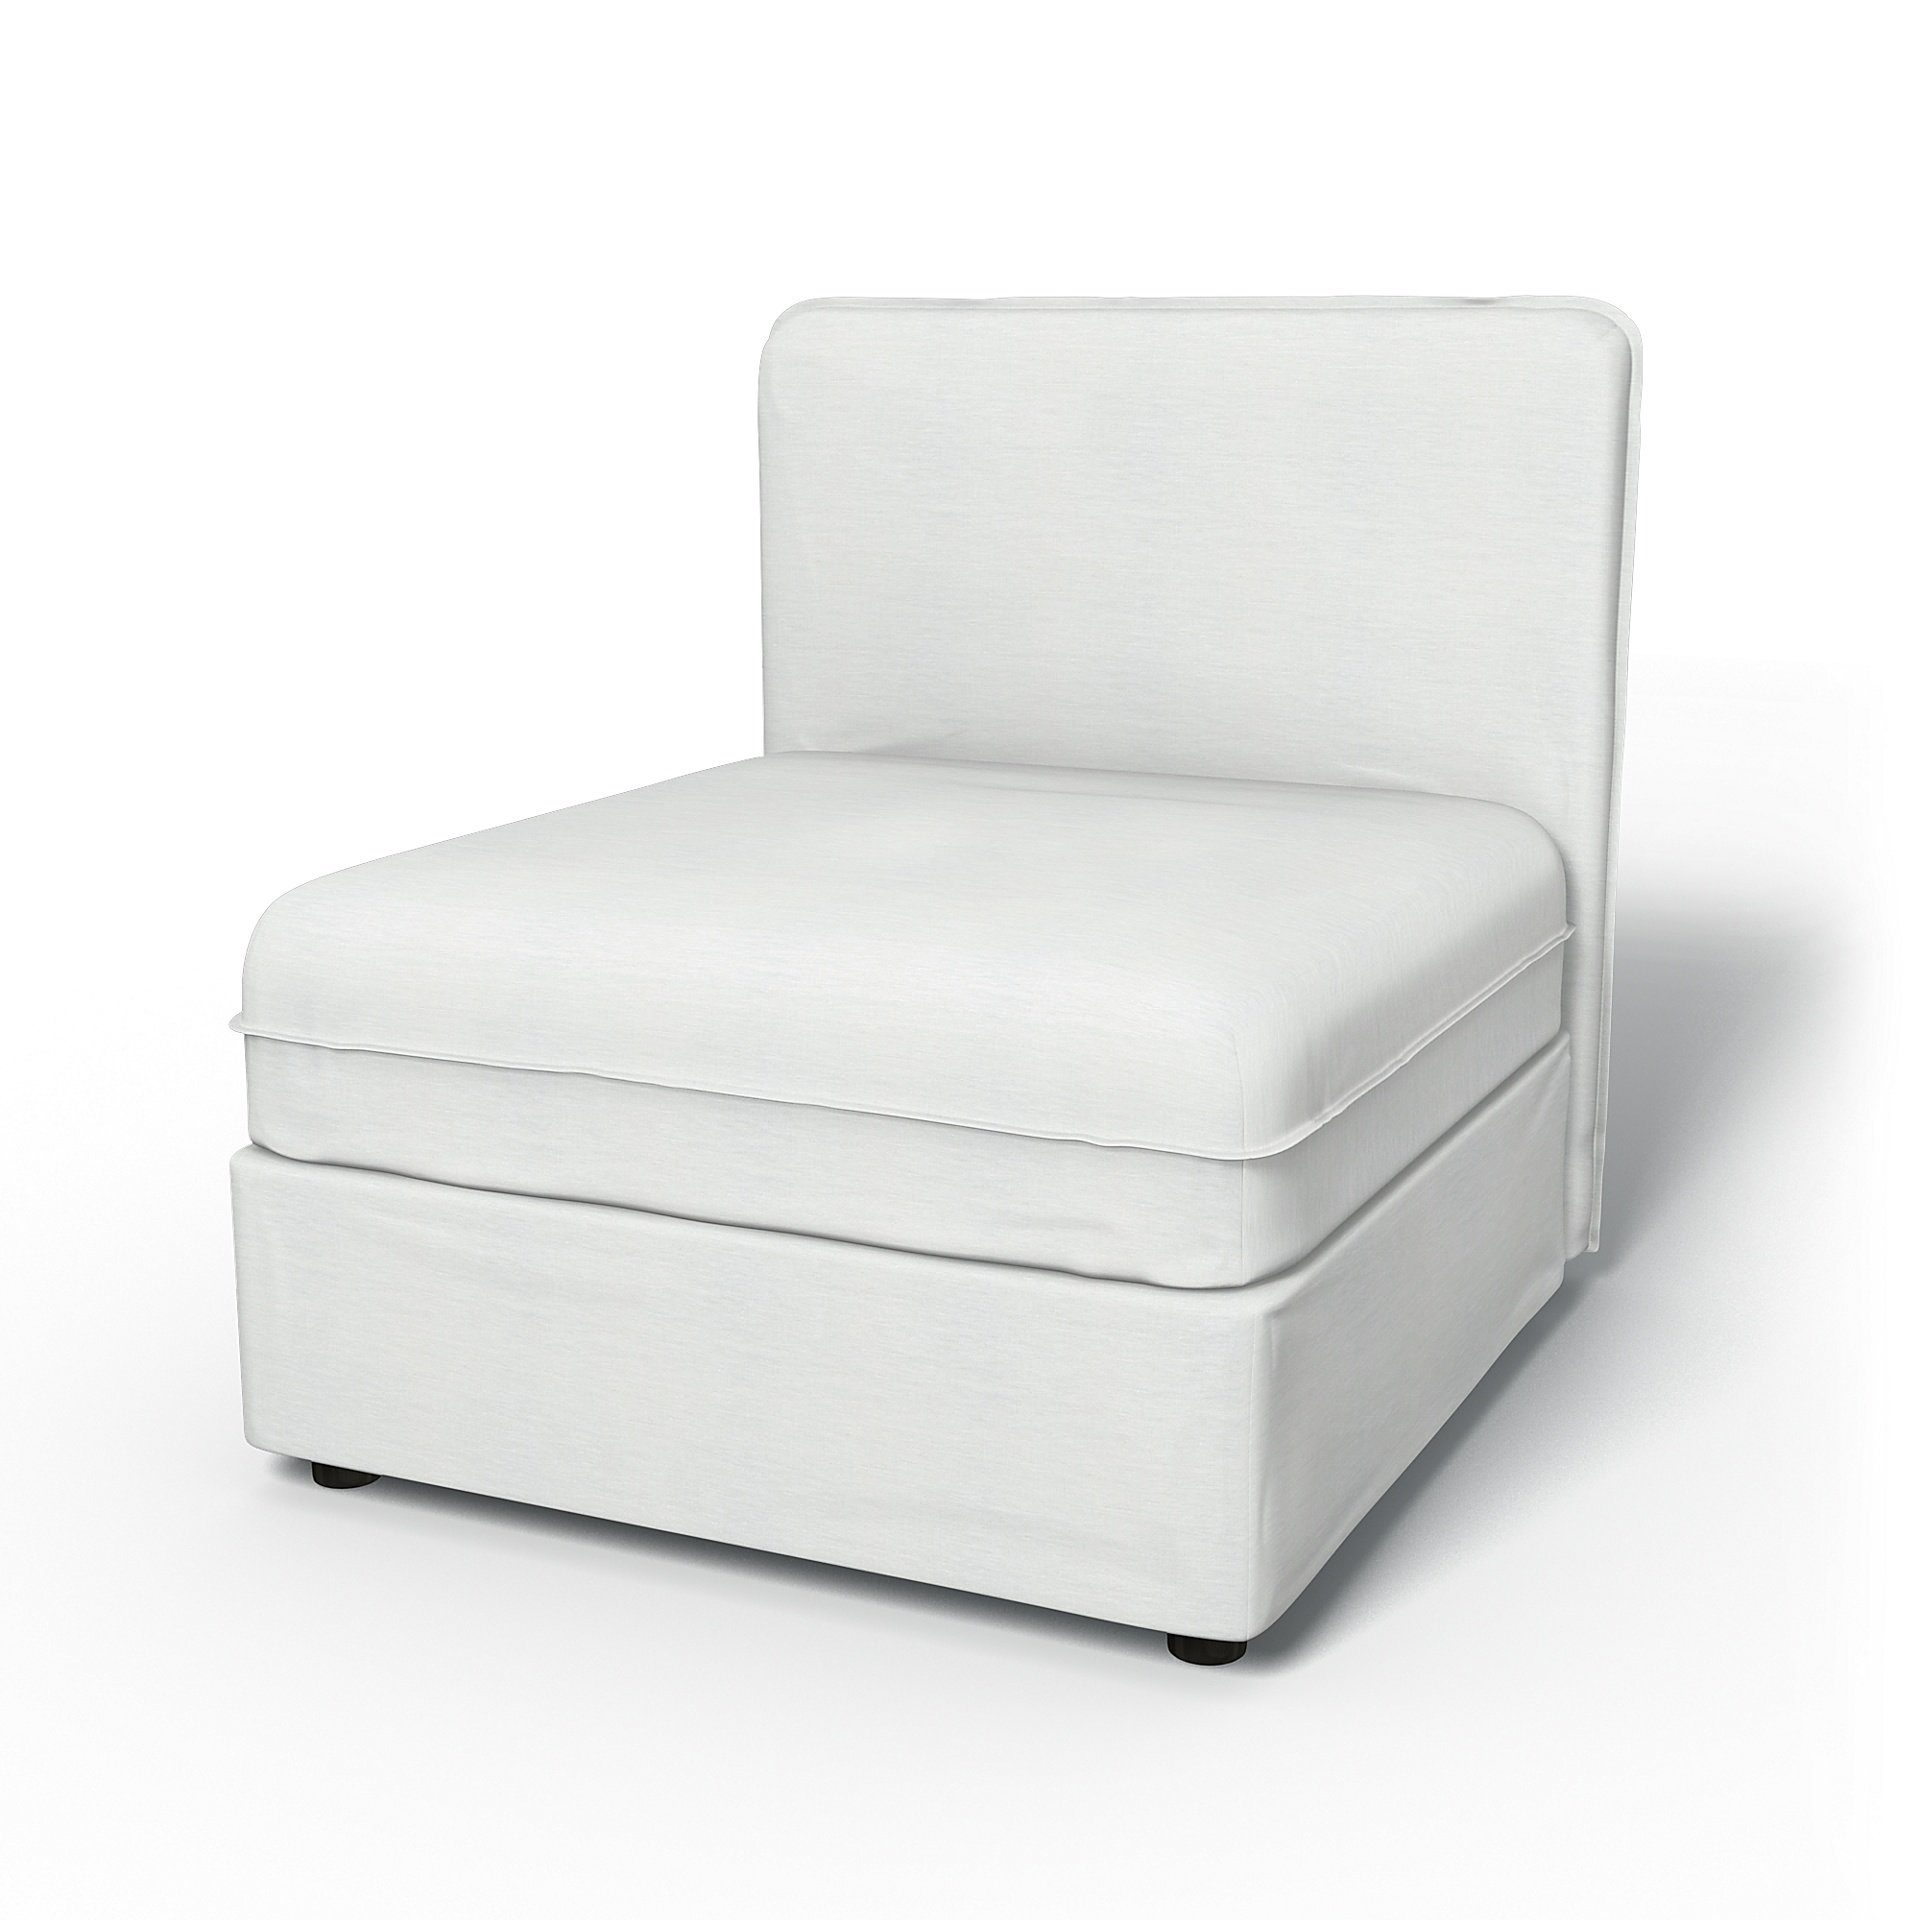 IKEA - Vallentuna Seat Module with Low Back Cover 80x80cm 32x32in, White, Linen - Bemz